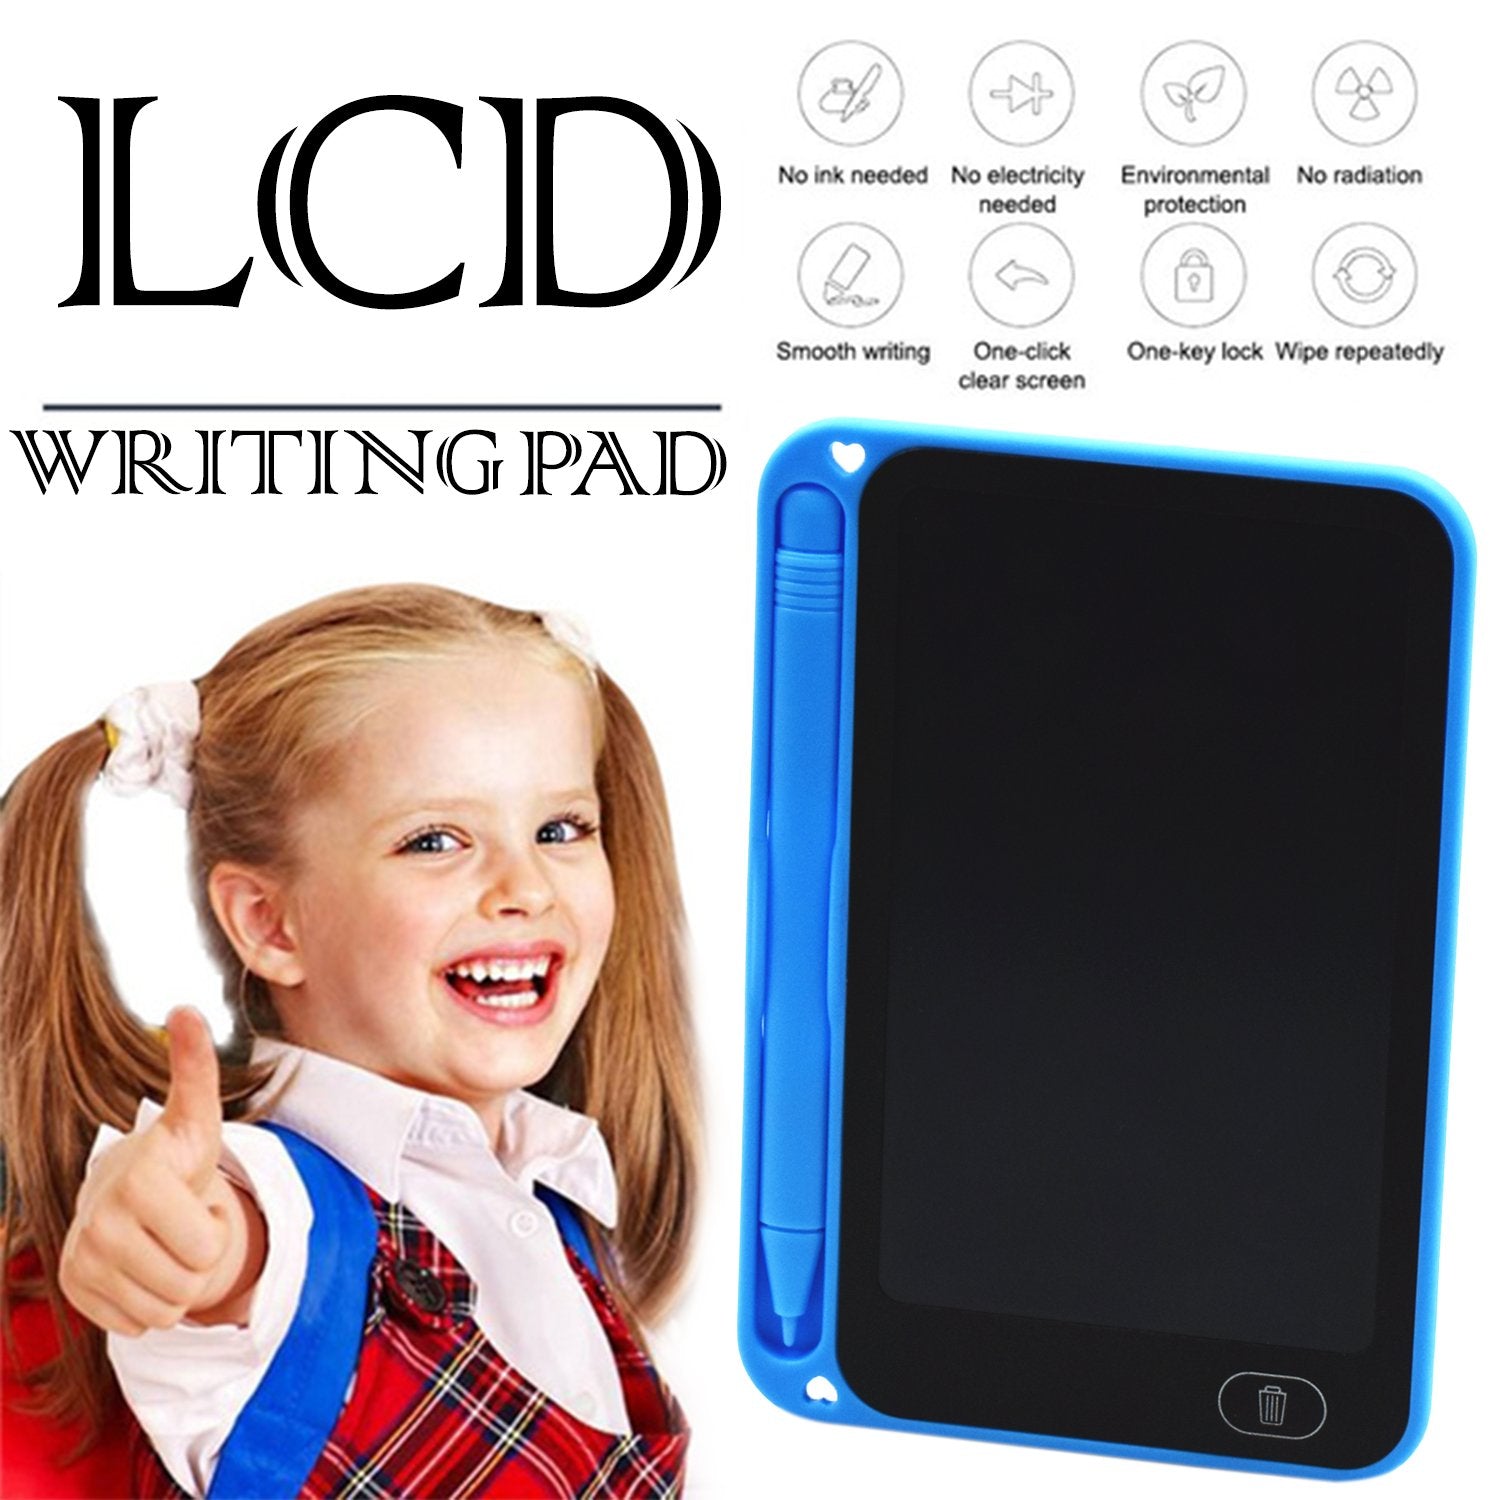 1464 Portable 6.5 LCD Writing Digital Tablet Pad for Writing/Drawing